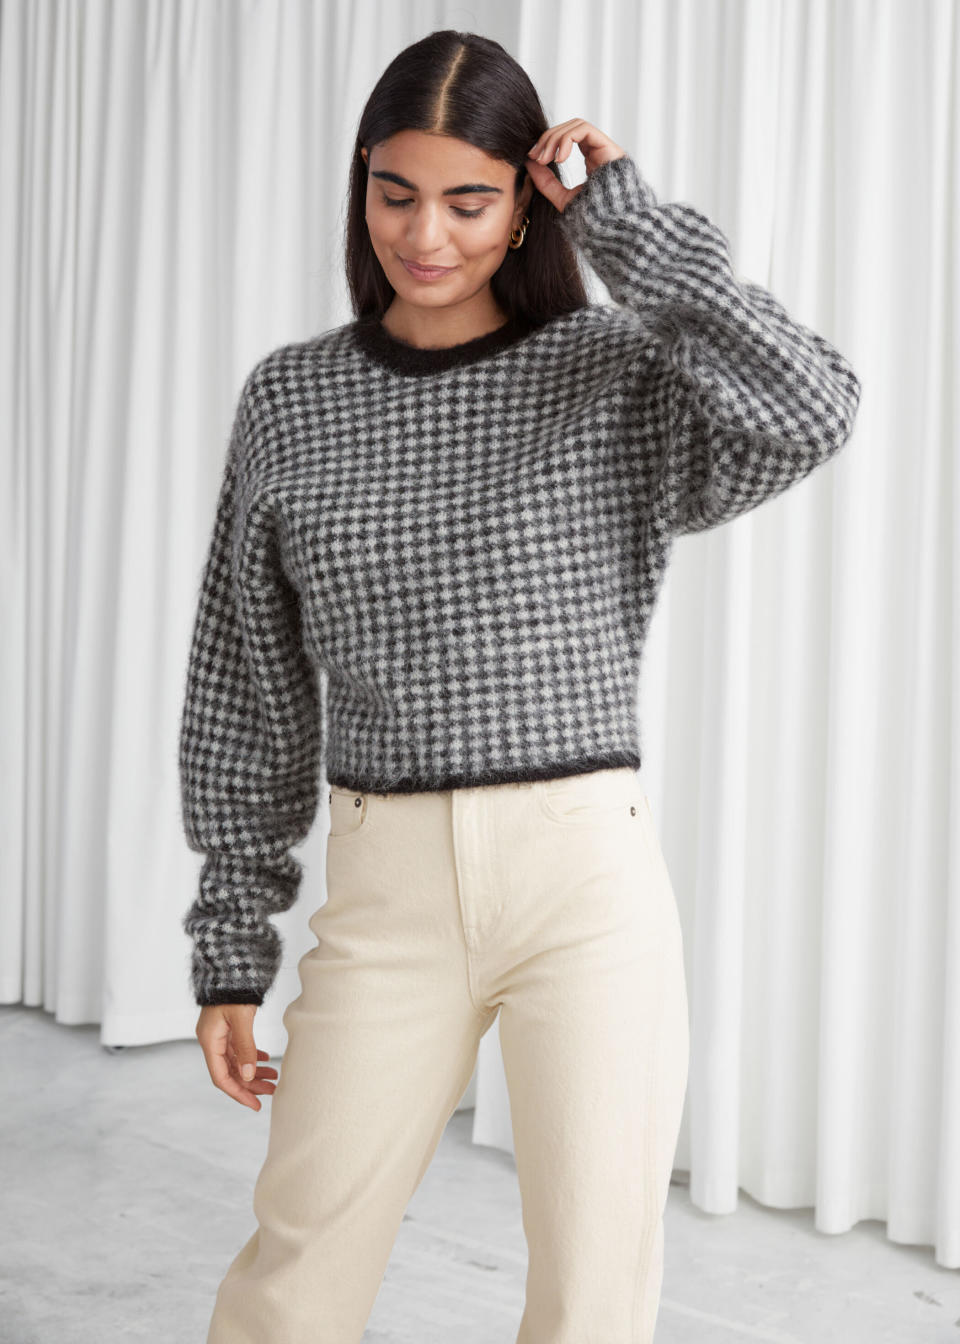 Thanks to "The Queen's Gambit," checkerboard prints have made a comeback. If they've been lusting over the series' fashion, this sweater will be a checkmate. <a href="https://fave.co/33IzLpD" target="_blank" rel="noopener noreferrer">Find it for $99 at &amp; Other Stories</a>. 